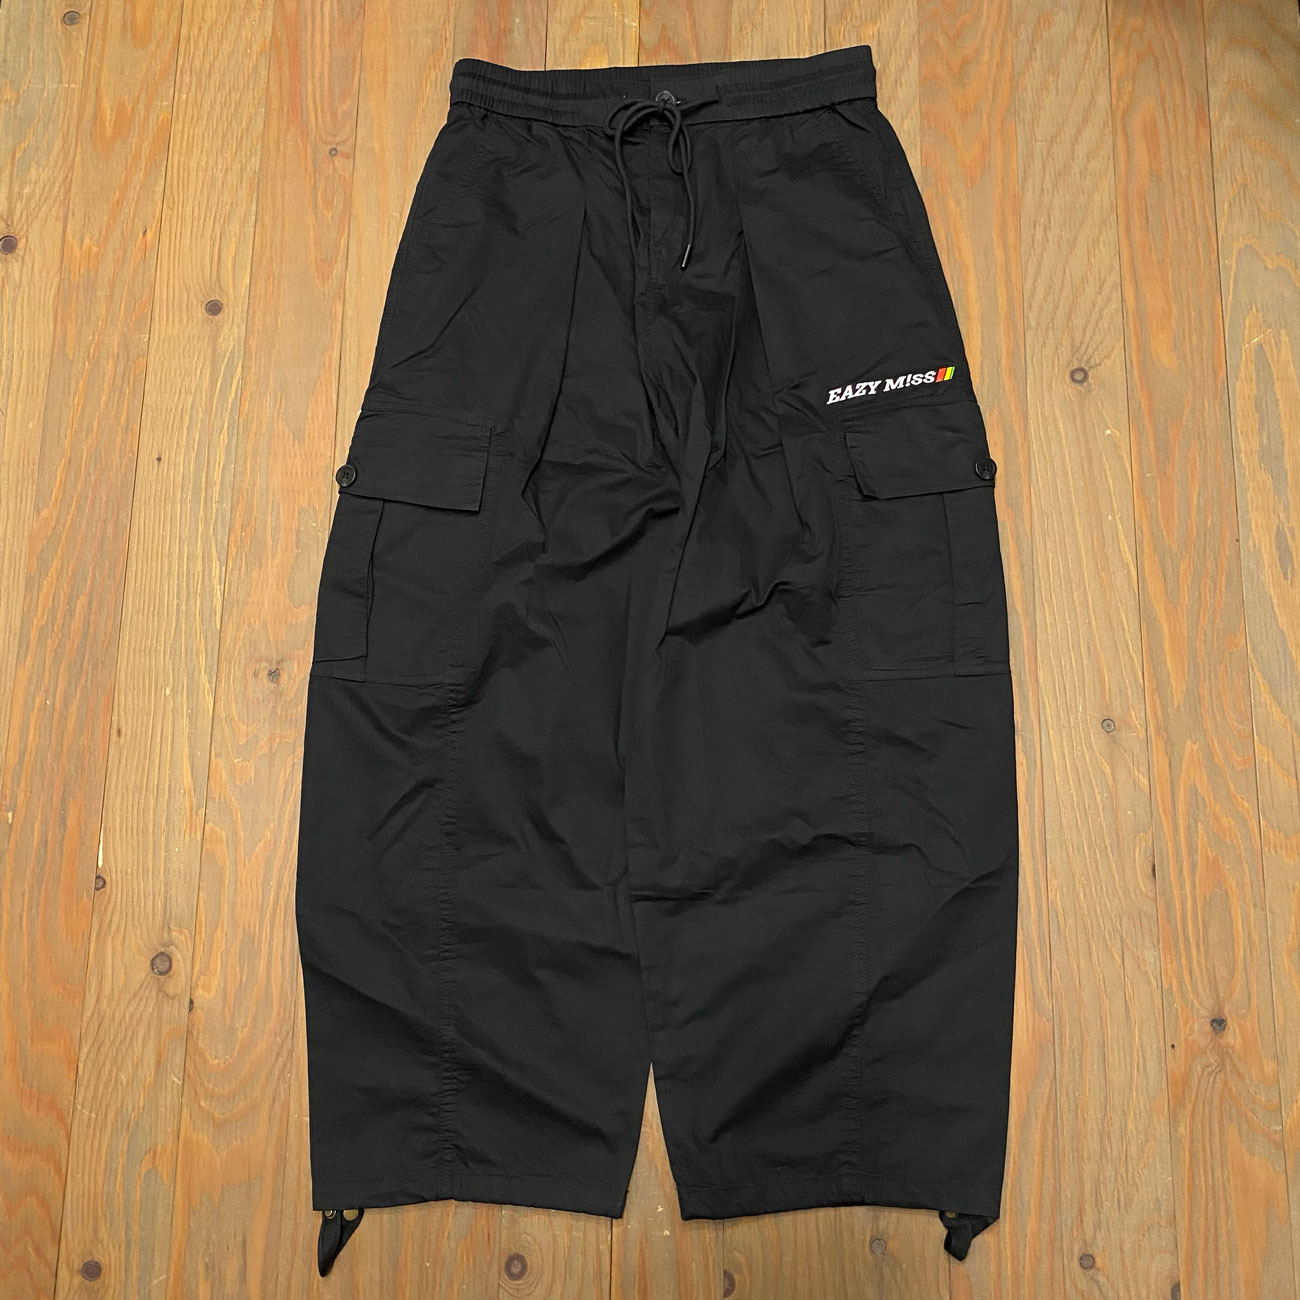 EAZY M!SS WIDE CARGO PANTS